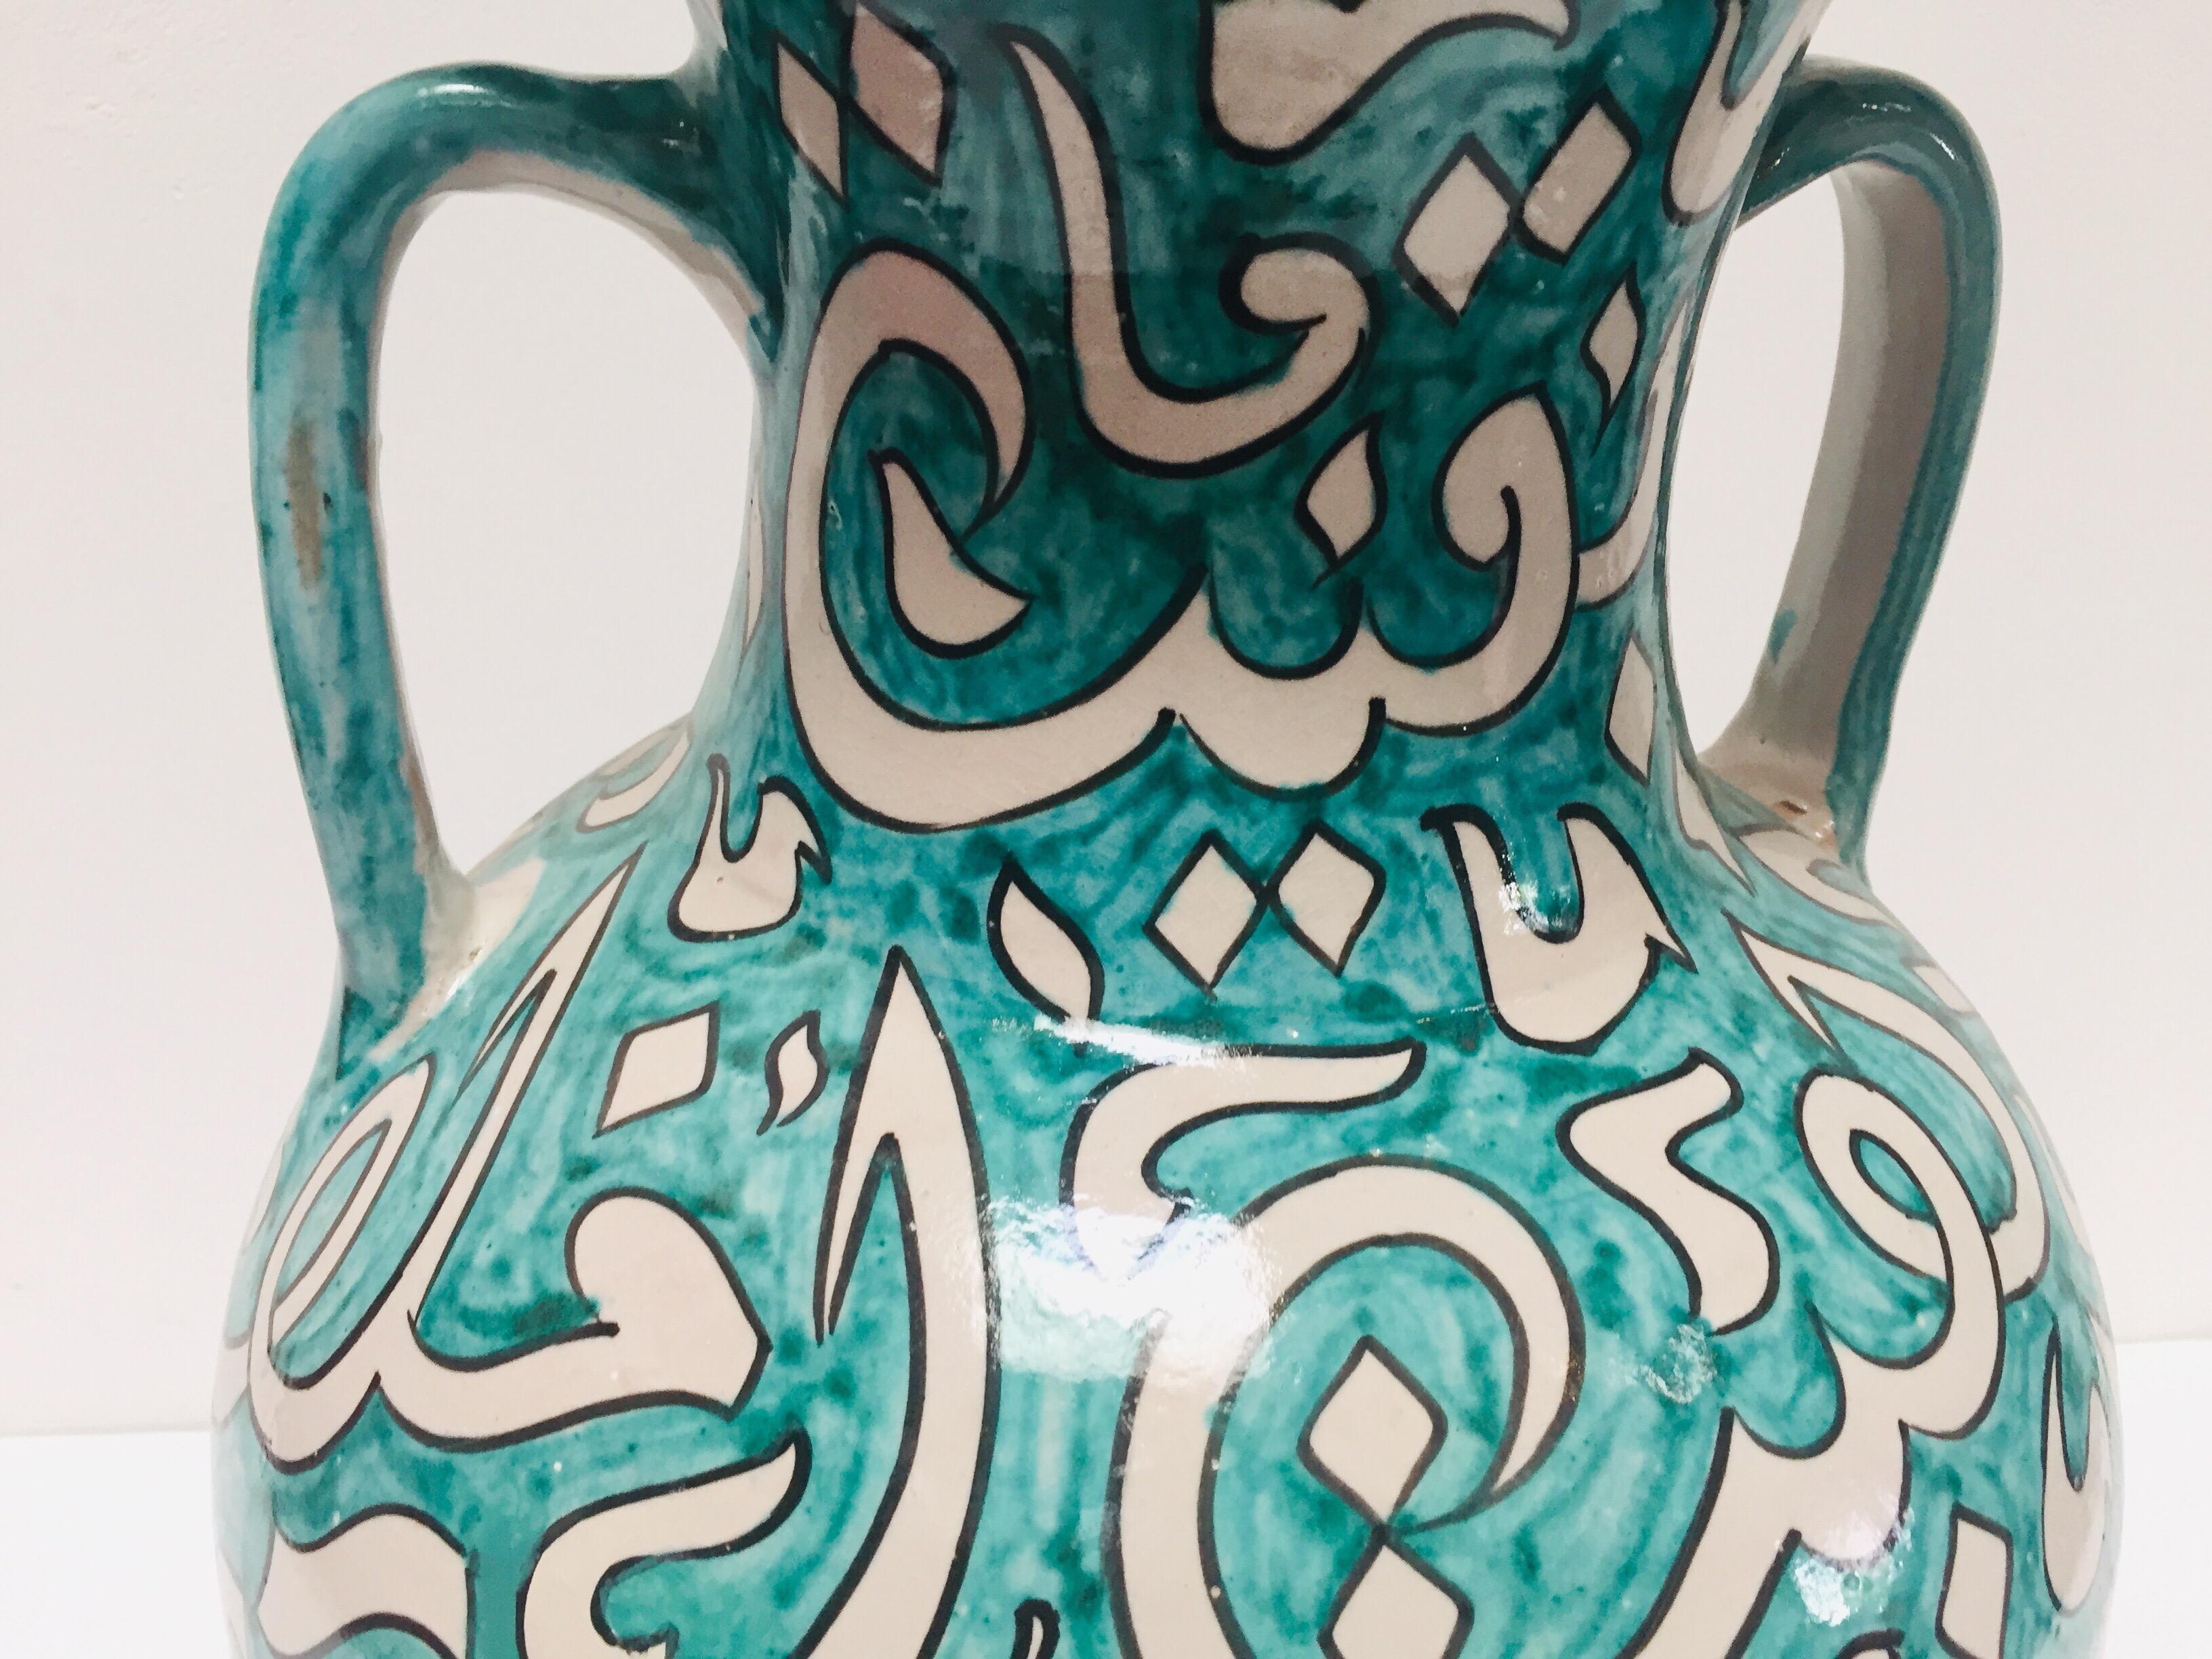 Large Moroccan Glazed Ceramic Vase with Arabic Calligraphy Turquoise Writing Fez For Sale 6